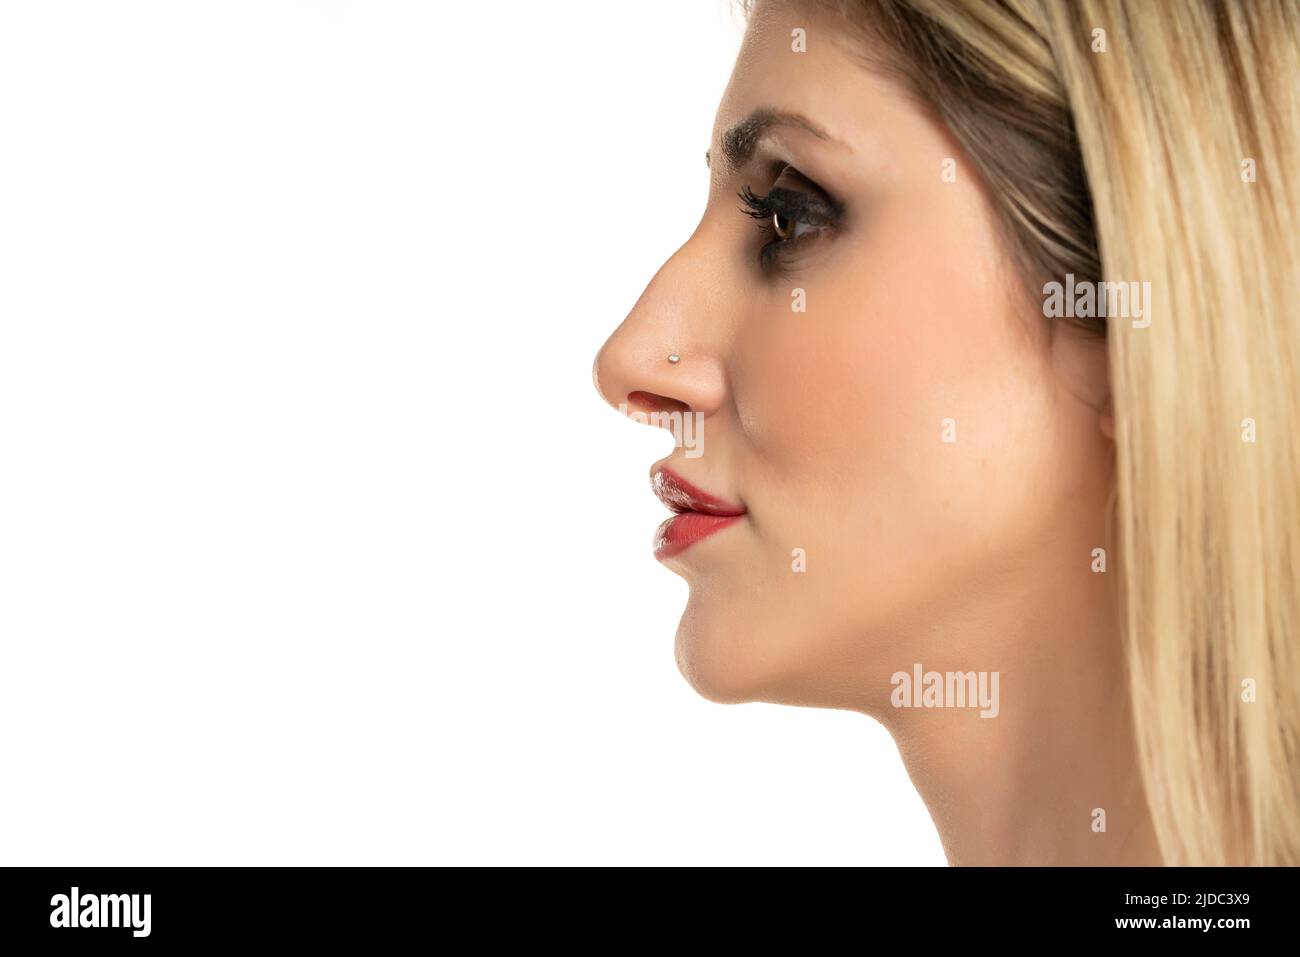 human noses profile